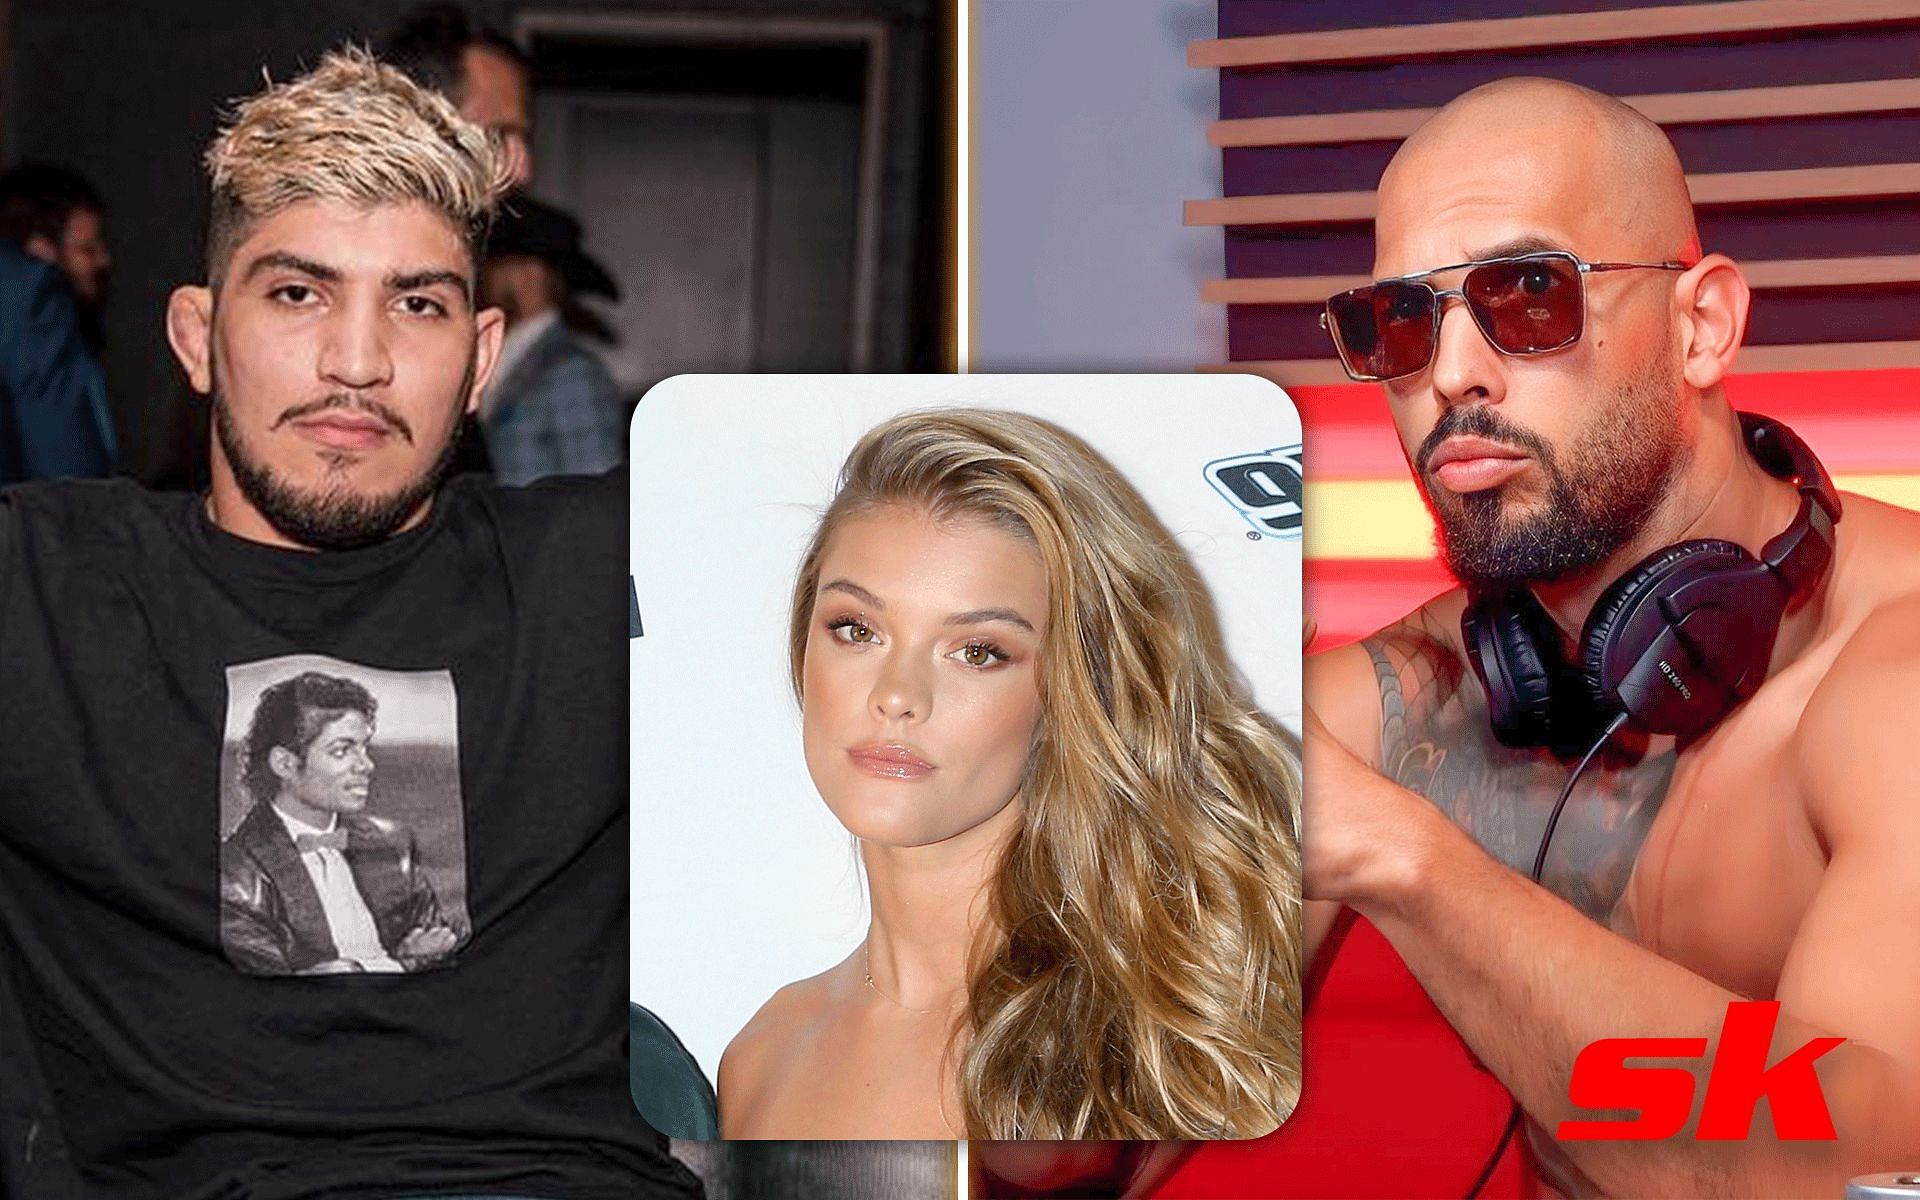 Dillon Danis, Nina Agdal and Andrew Tate [Image credits: @dillondanis on Instagram, Getty Images and @TateNews_ on Twitter] 